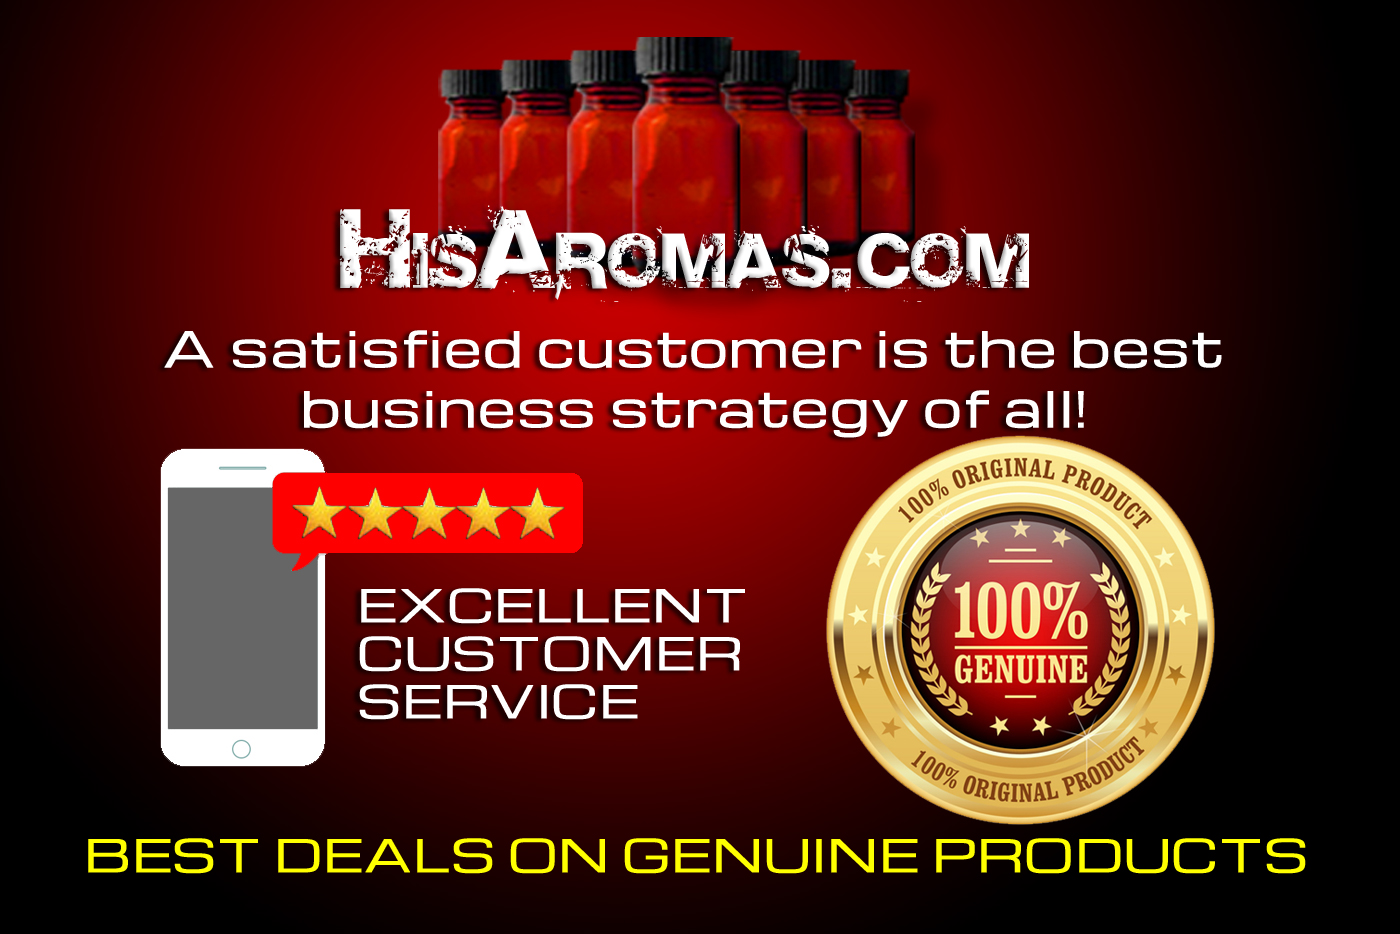 HisAromas - A satisfied customer is the best business strategy of all! Excellent Customer Service - Best Deals on Genuine Products!